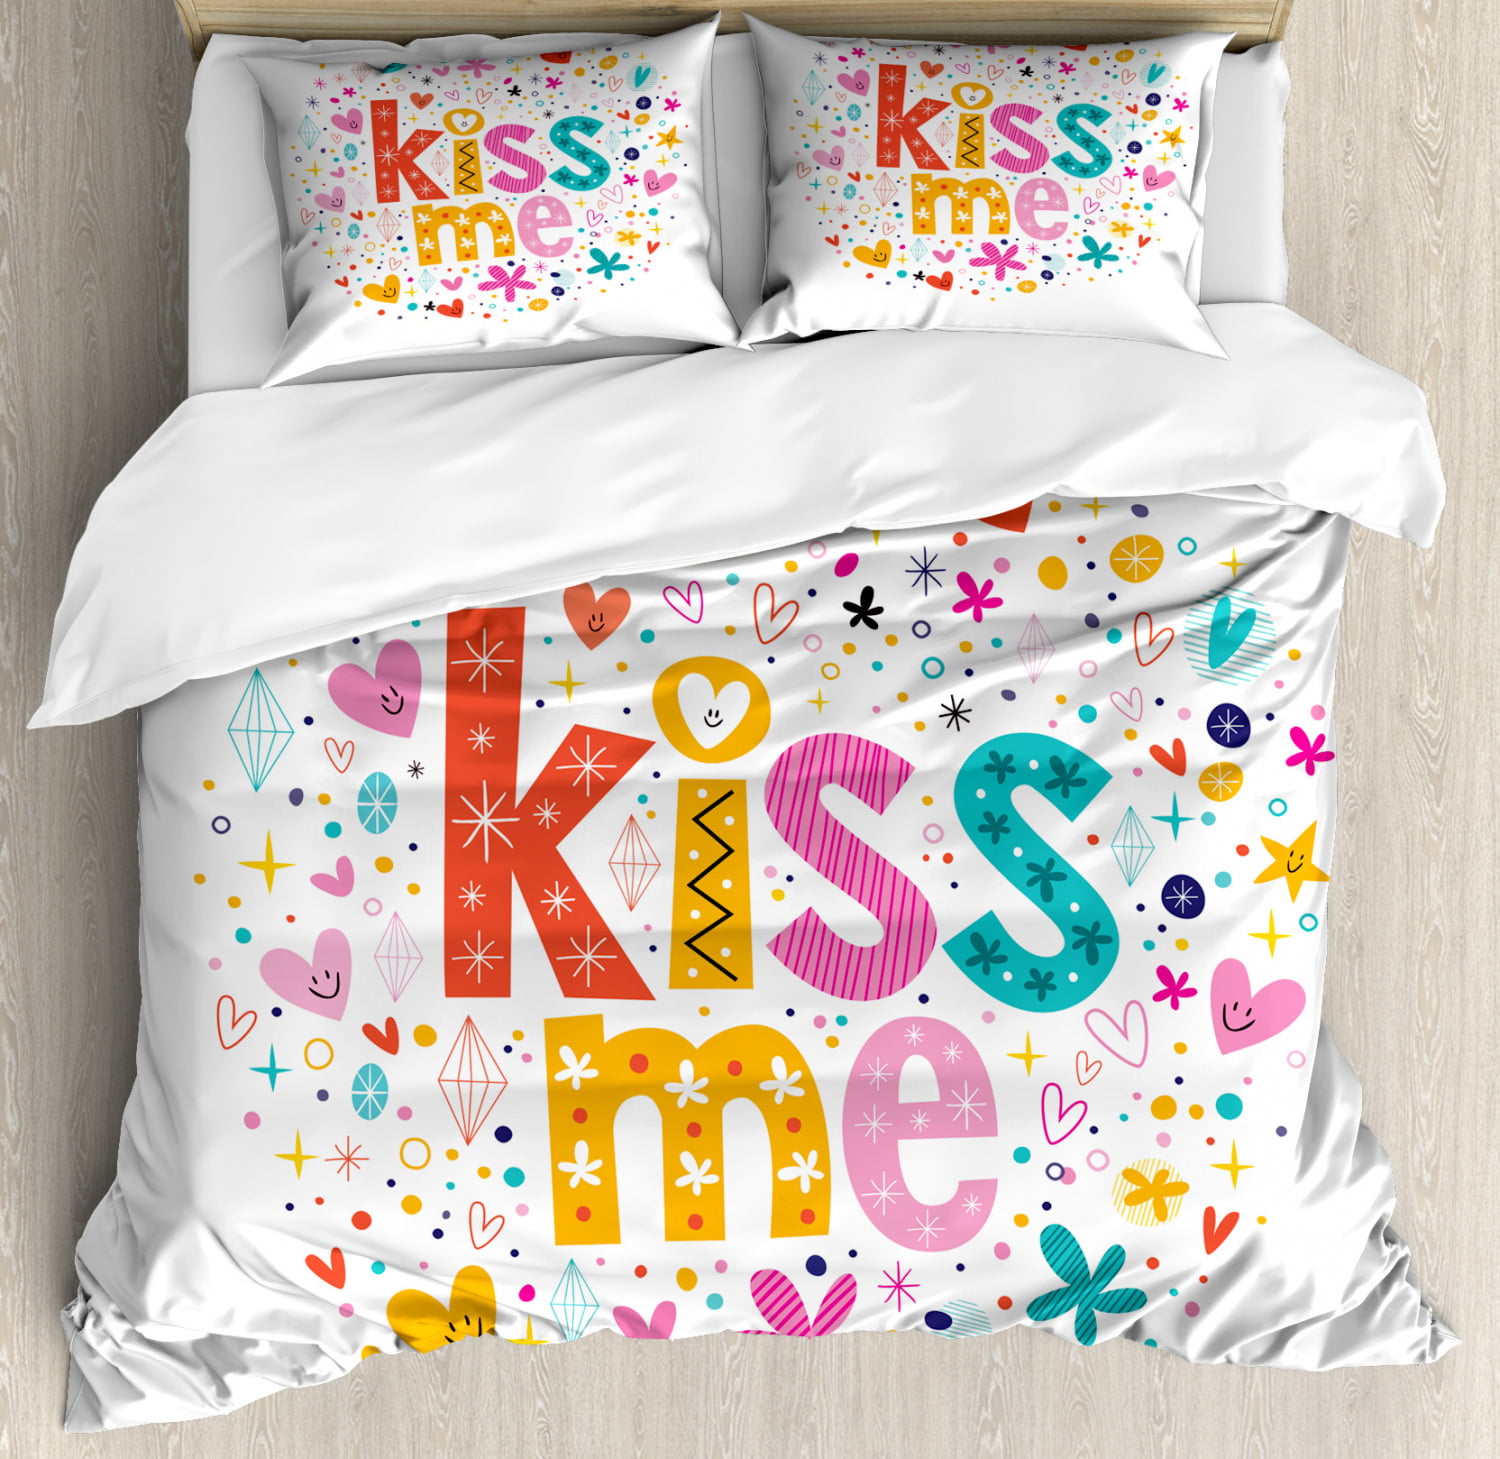 Kiss Me King Size Duvet Cover Set Retro Romantic Typography With